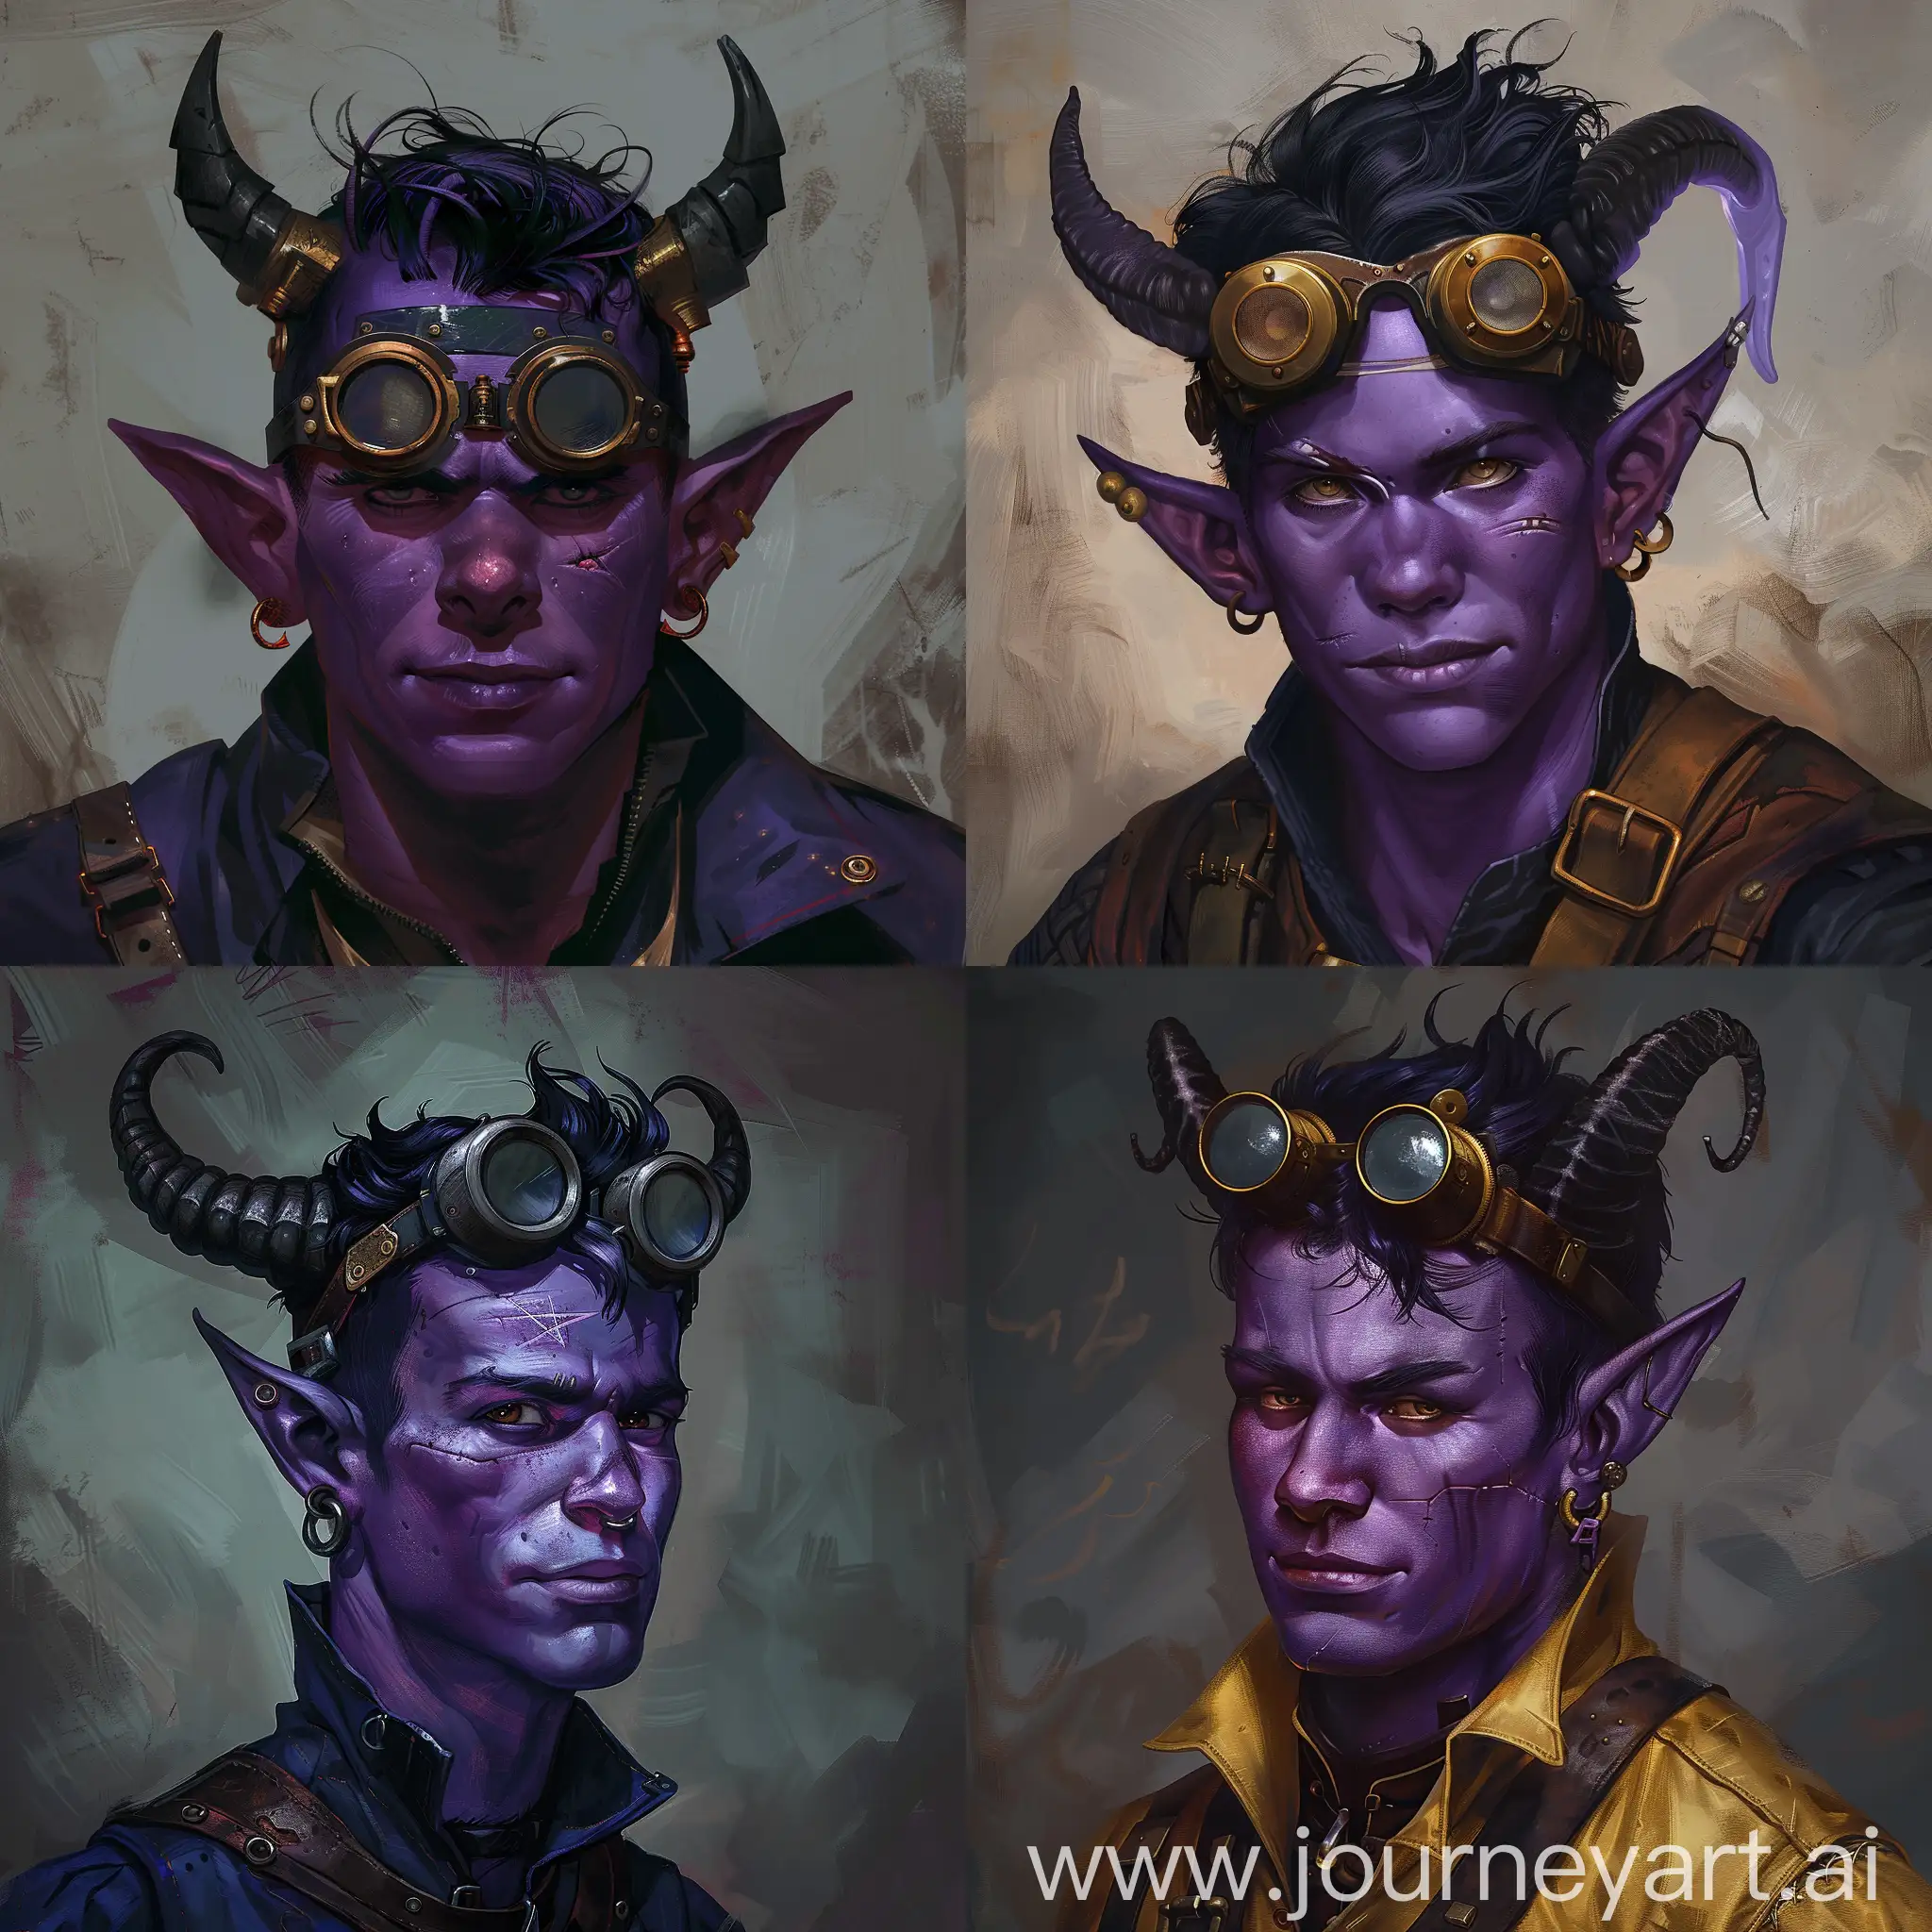 D&D portrait. A tiefling male artificer with violet skin, black hair, steampunk welder's googles on forehead. Straight horns, little scar on his face